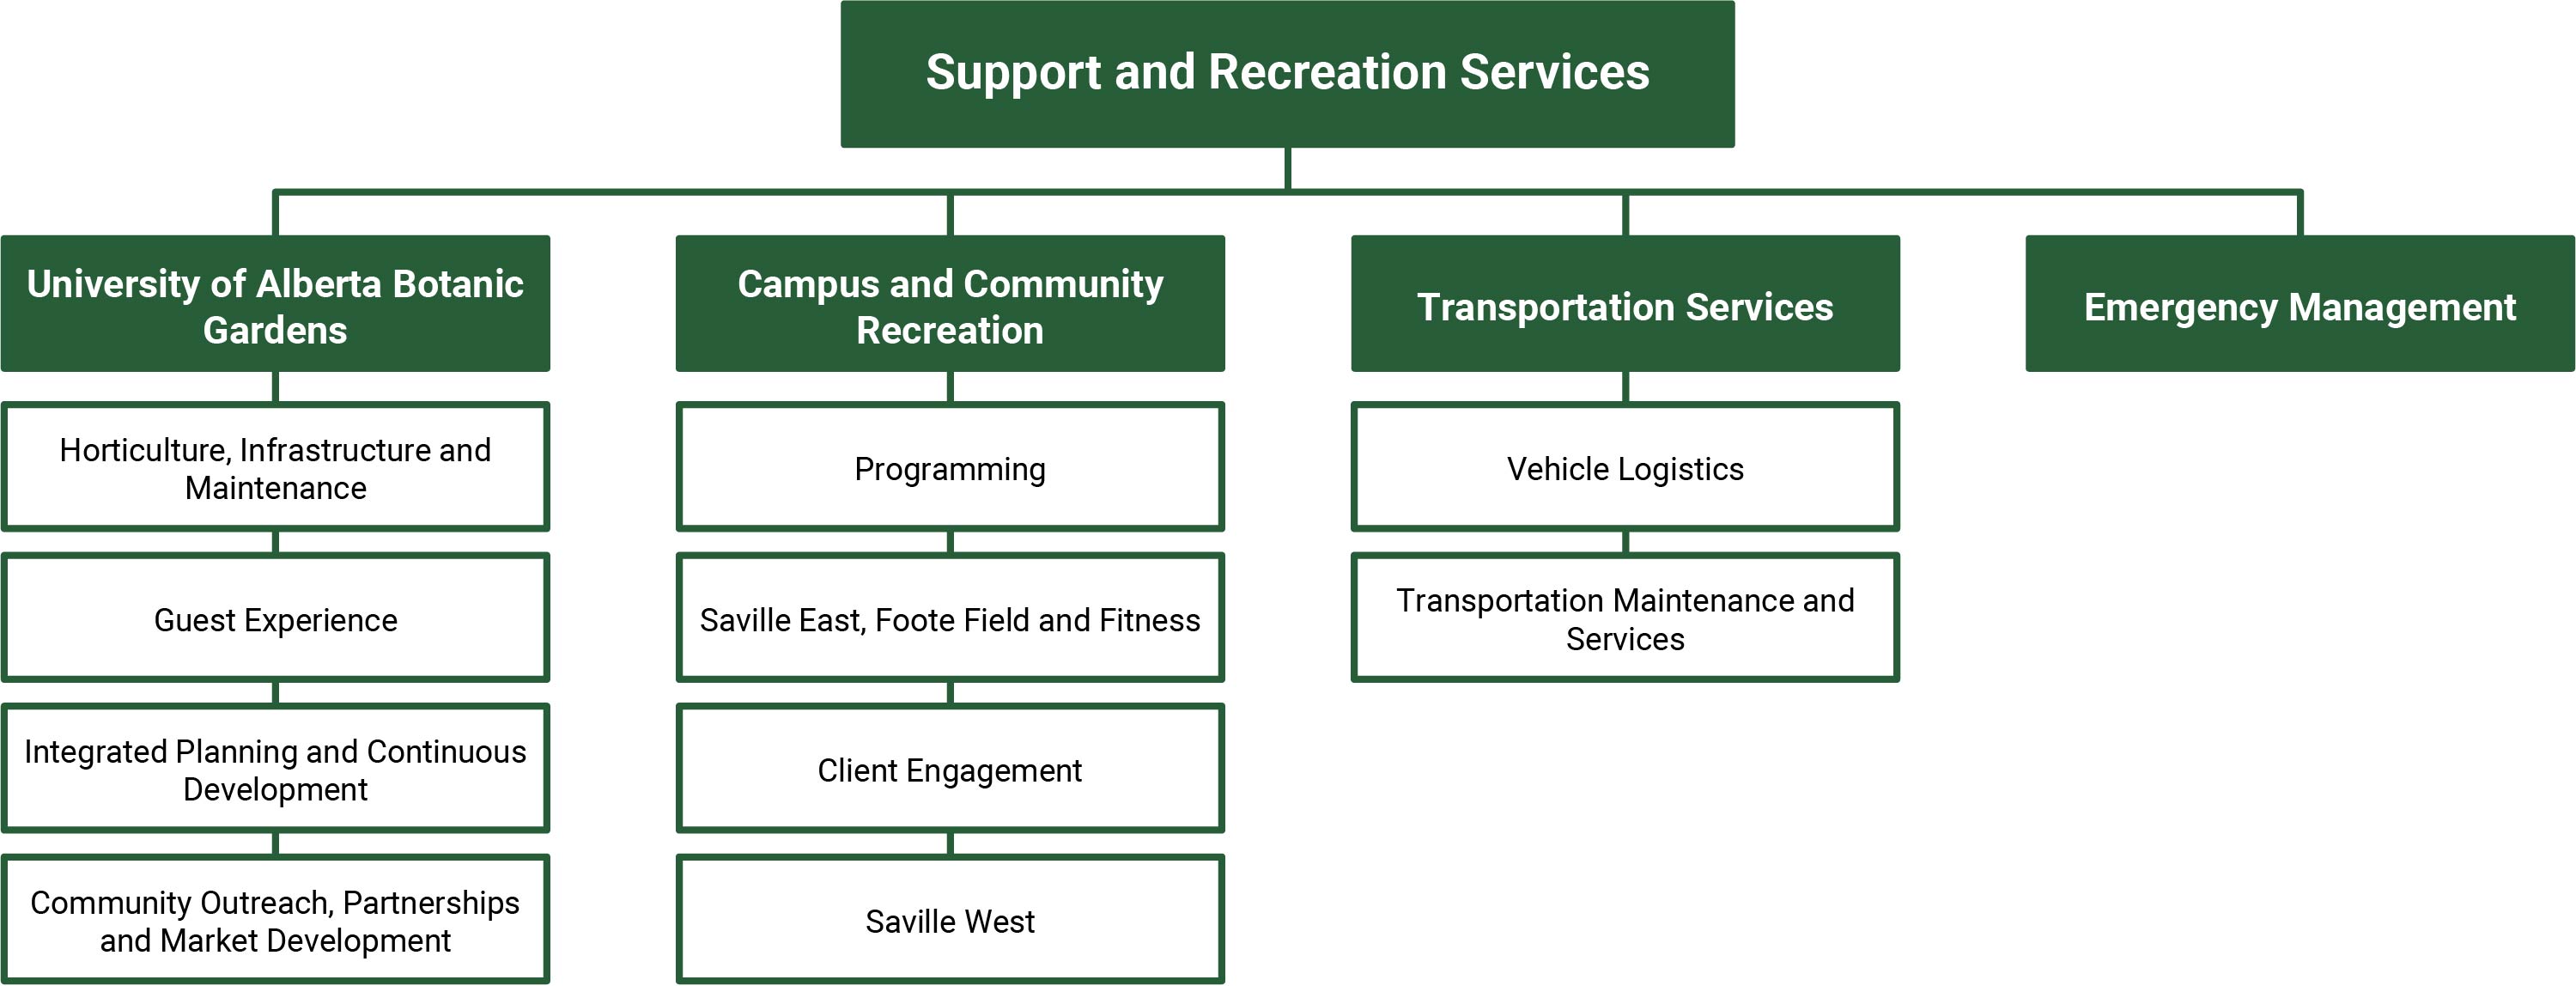 Organizational chart representing the Support and Recreation Services unit within the Vice-President Facilities & Operations portfolio